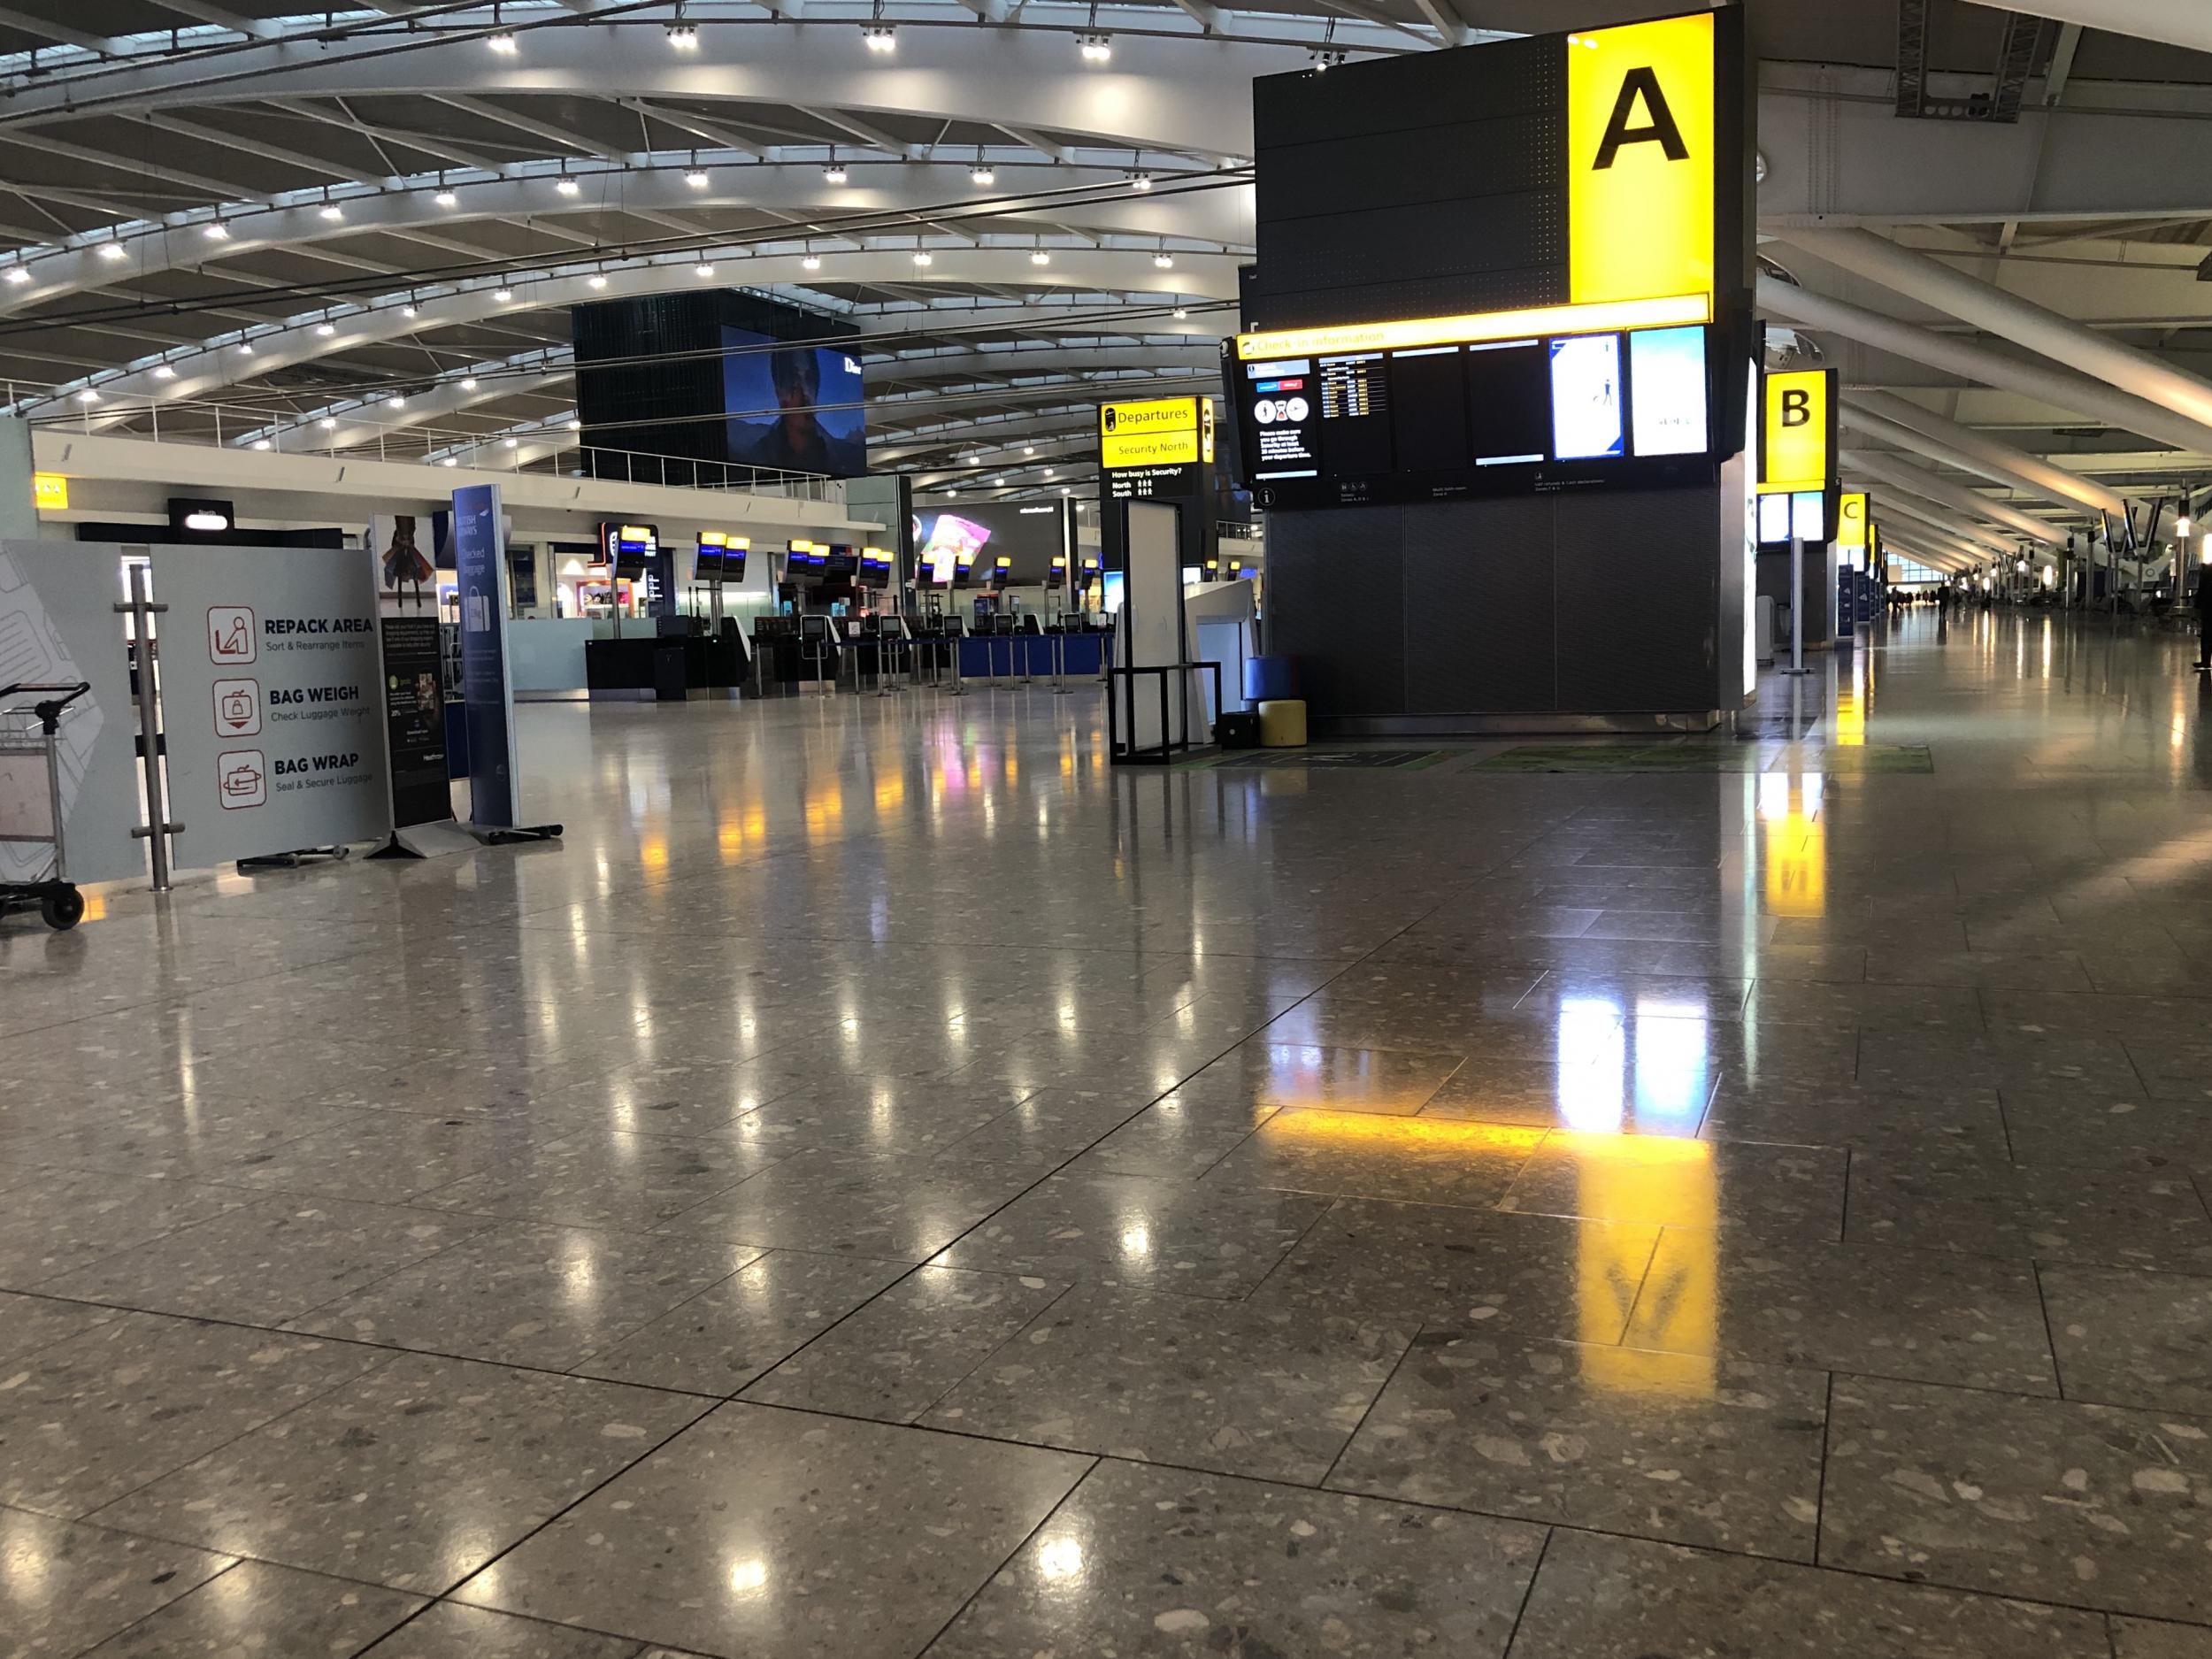 An unusually empty Heathrow Terminal 5 this morning: passengers whose flights have been cancelled have been advised to avoid the airport